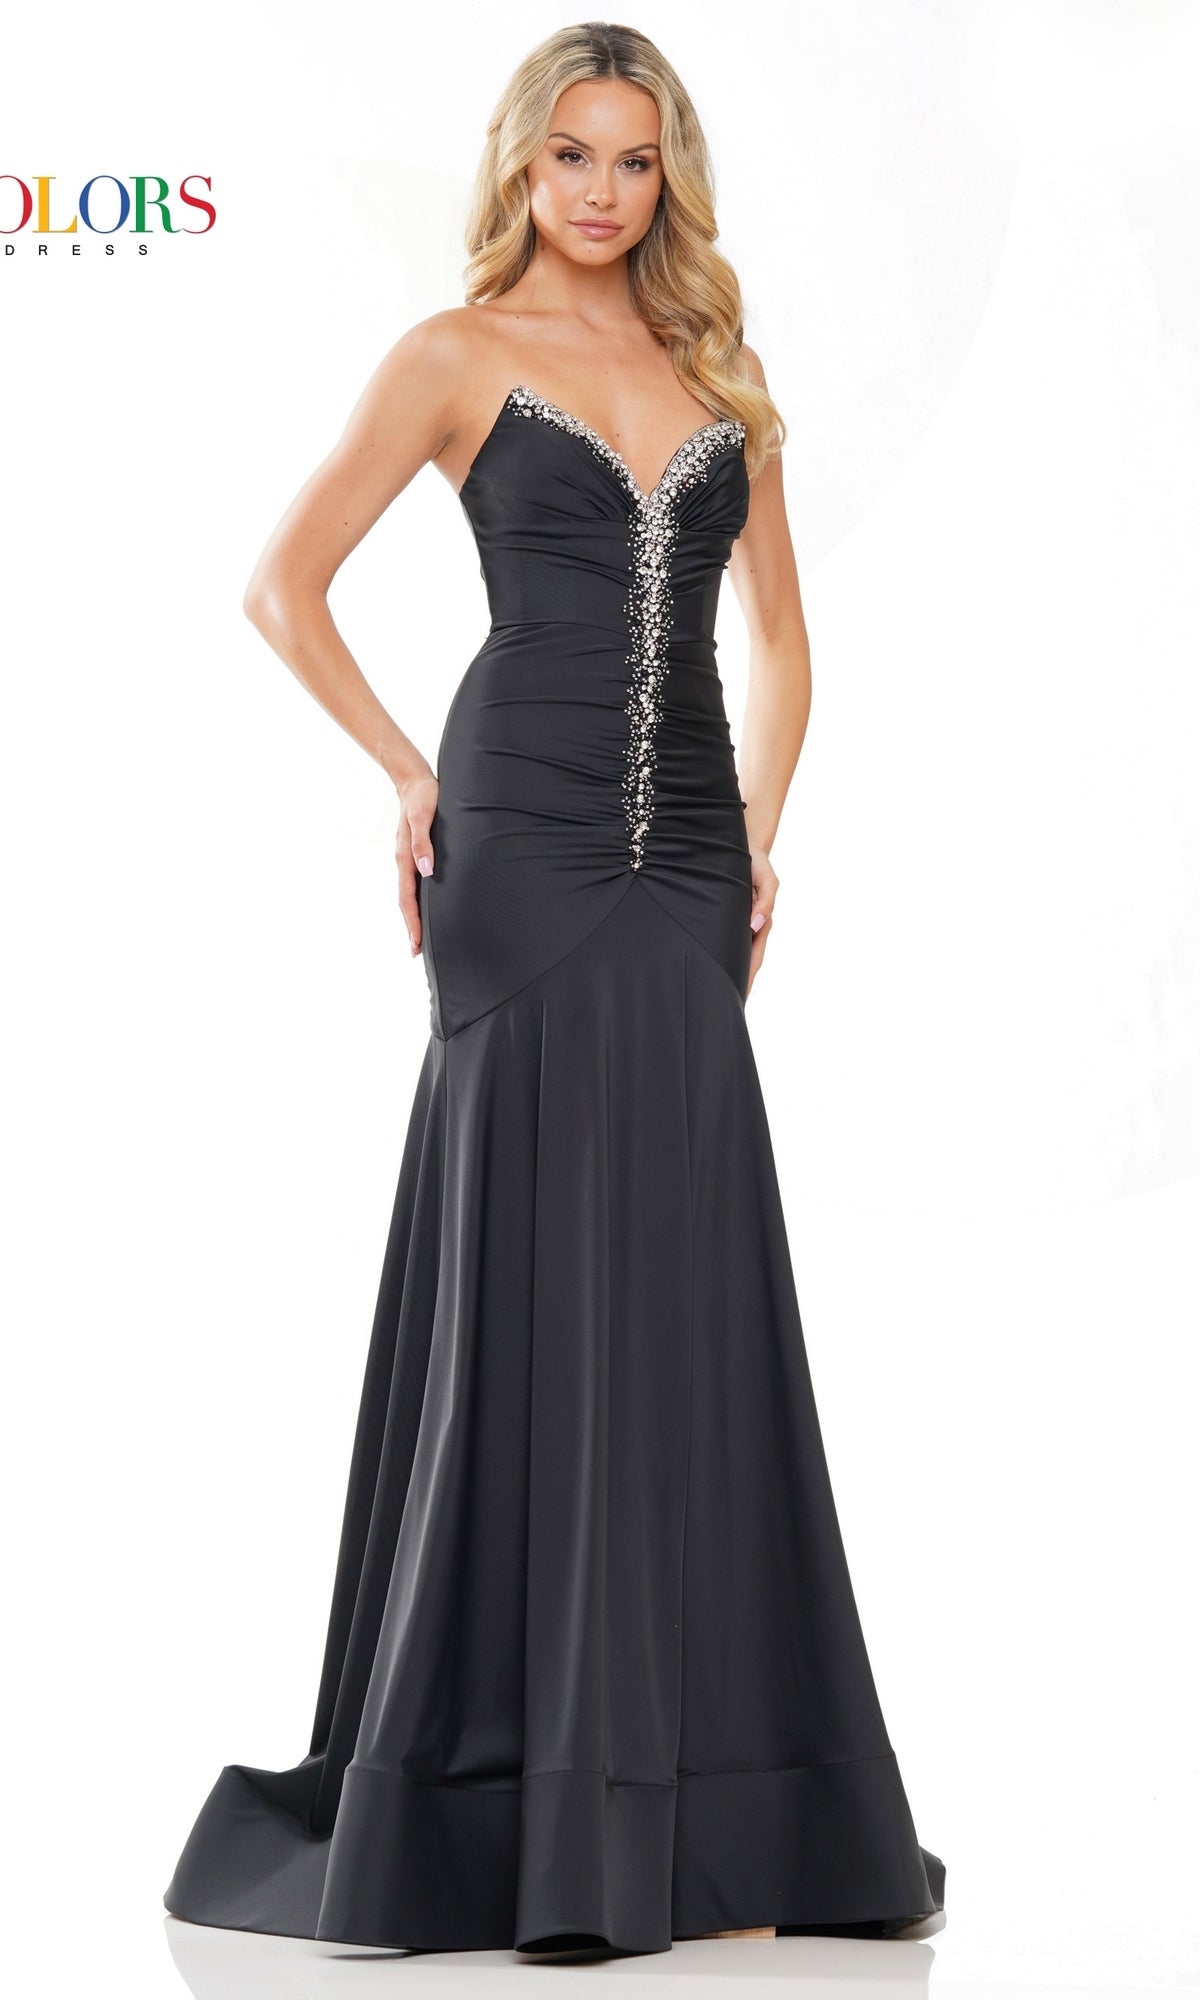 Strapless Ruched Long Prom Dress 3276 by Colors Dress